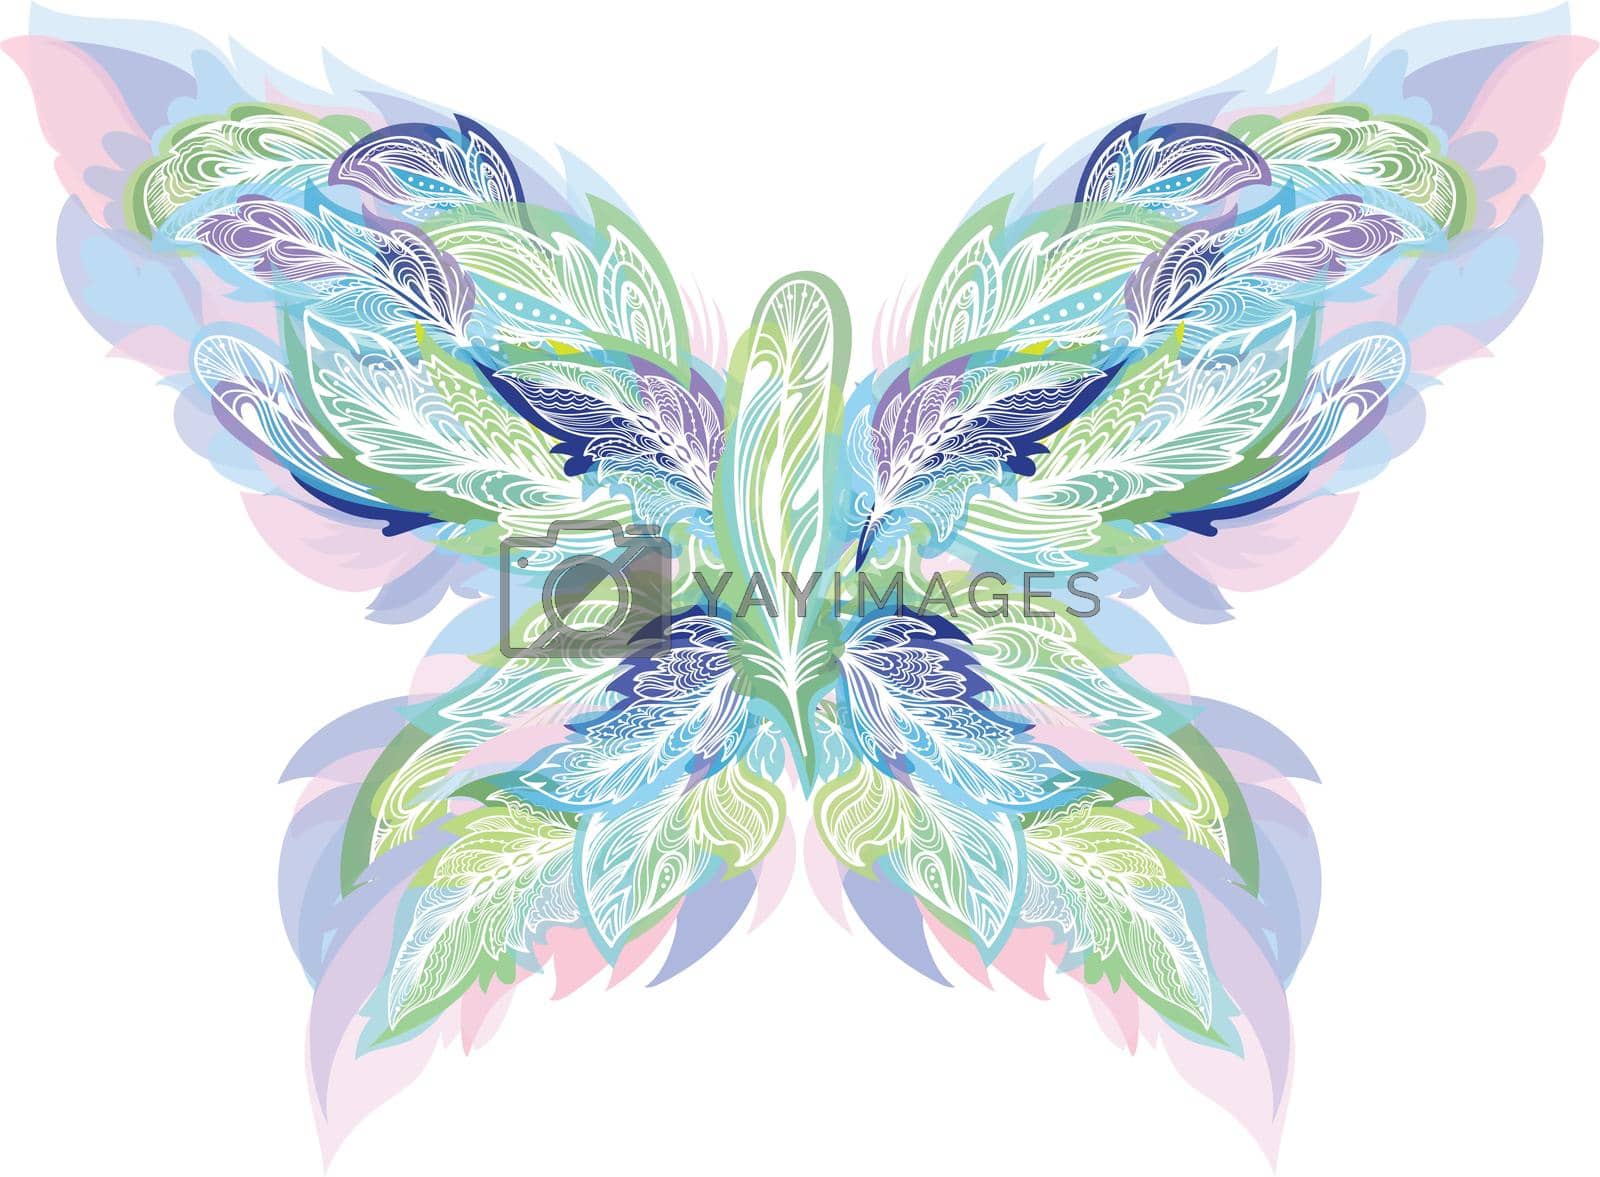 Royalty free image of Vector boho style shape made of feathers by kisika